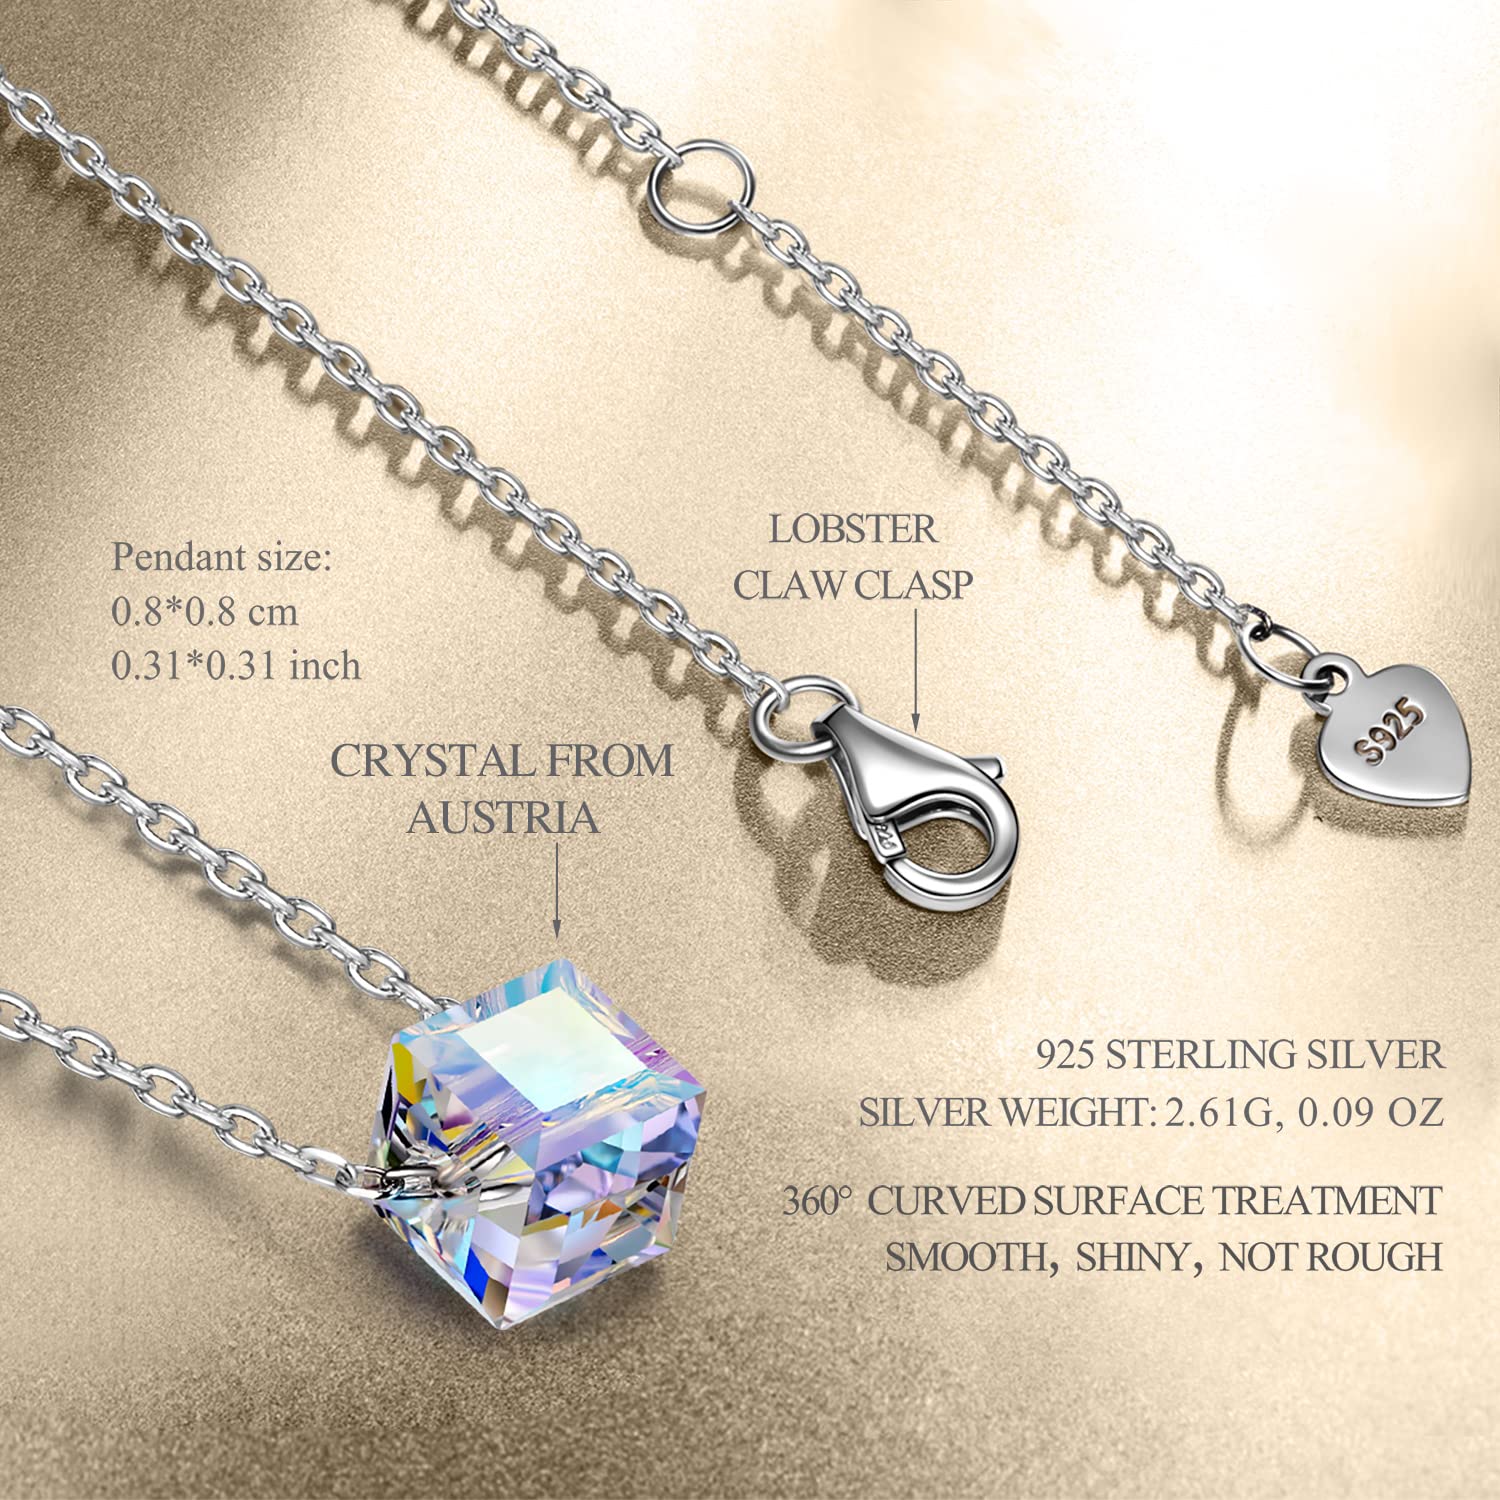 NINASUN Fantastic World Necklaces for Women, Sterling Silver Chain & Cube Crystals from Austria, Gift for Her with Delicate Jewelry Box